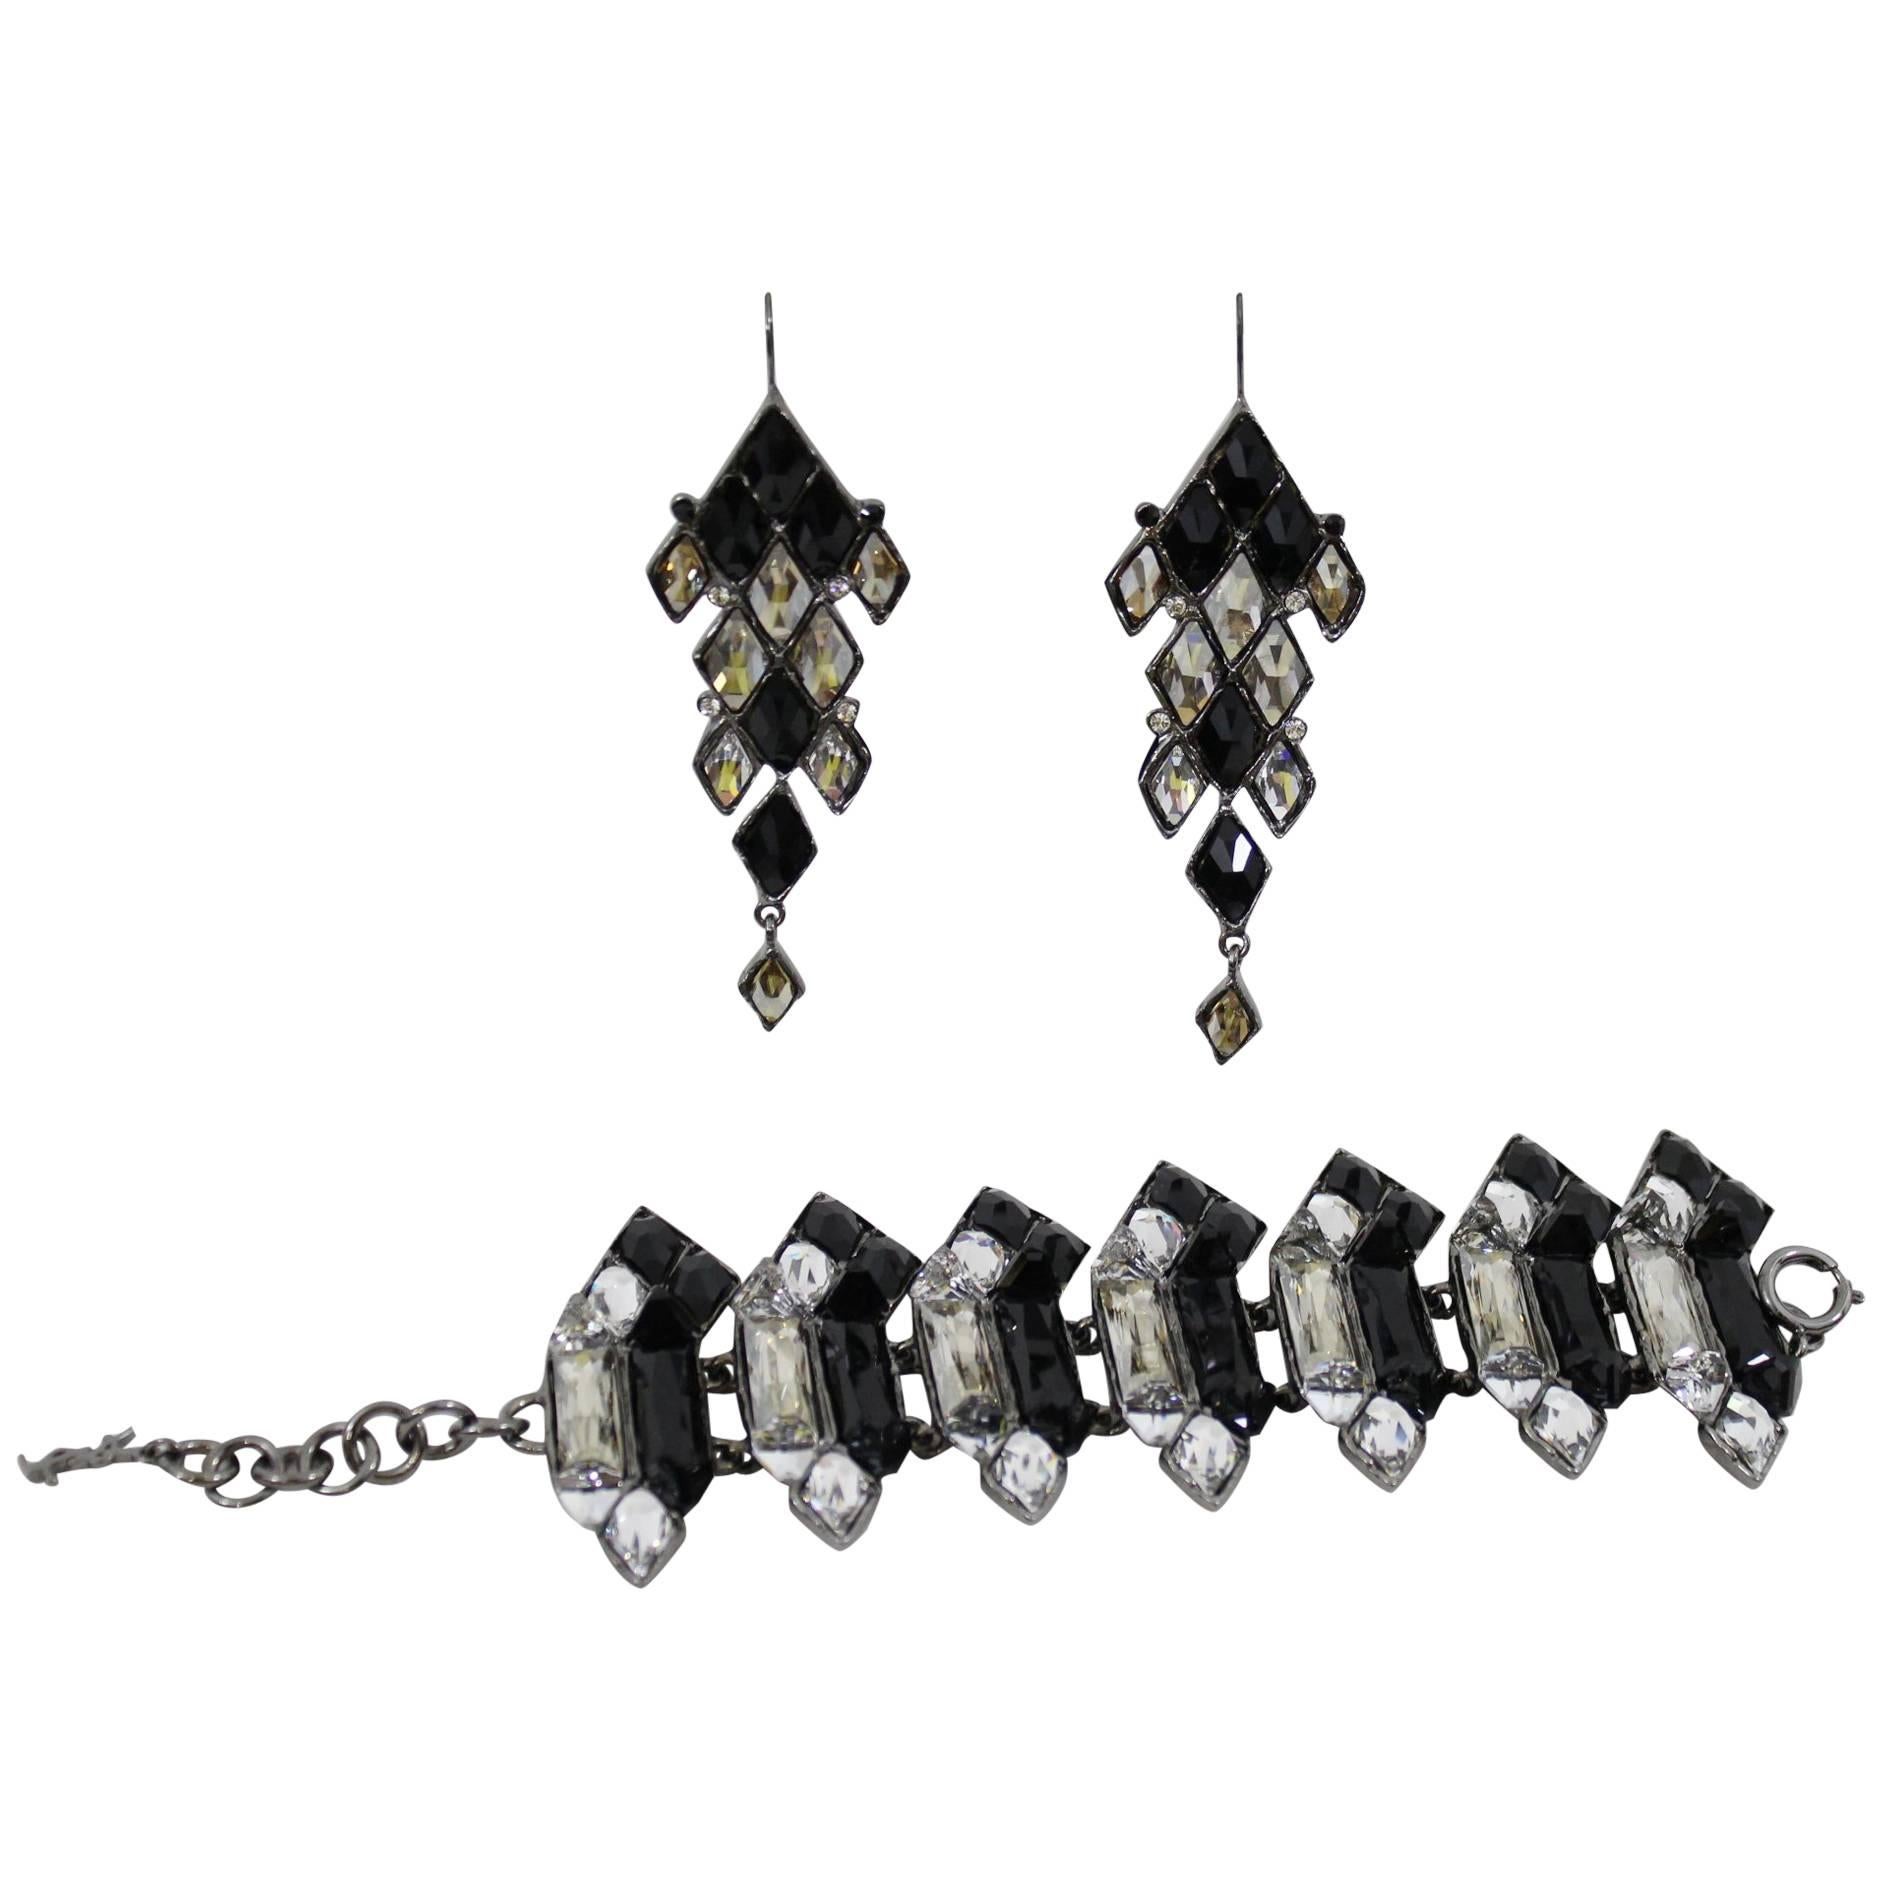 Amazing Yves Saint Laurent Jewelry Set (Earrings and Bracelet) Black and Crysta For Sale